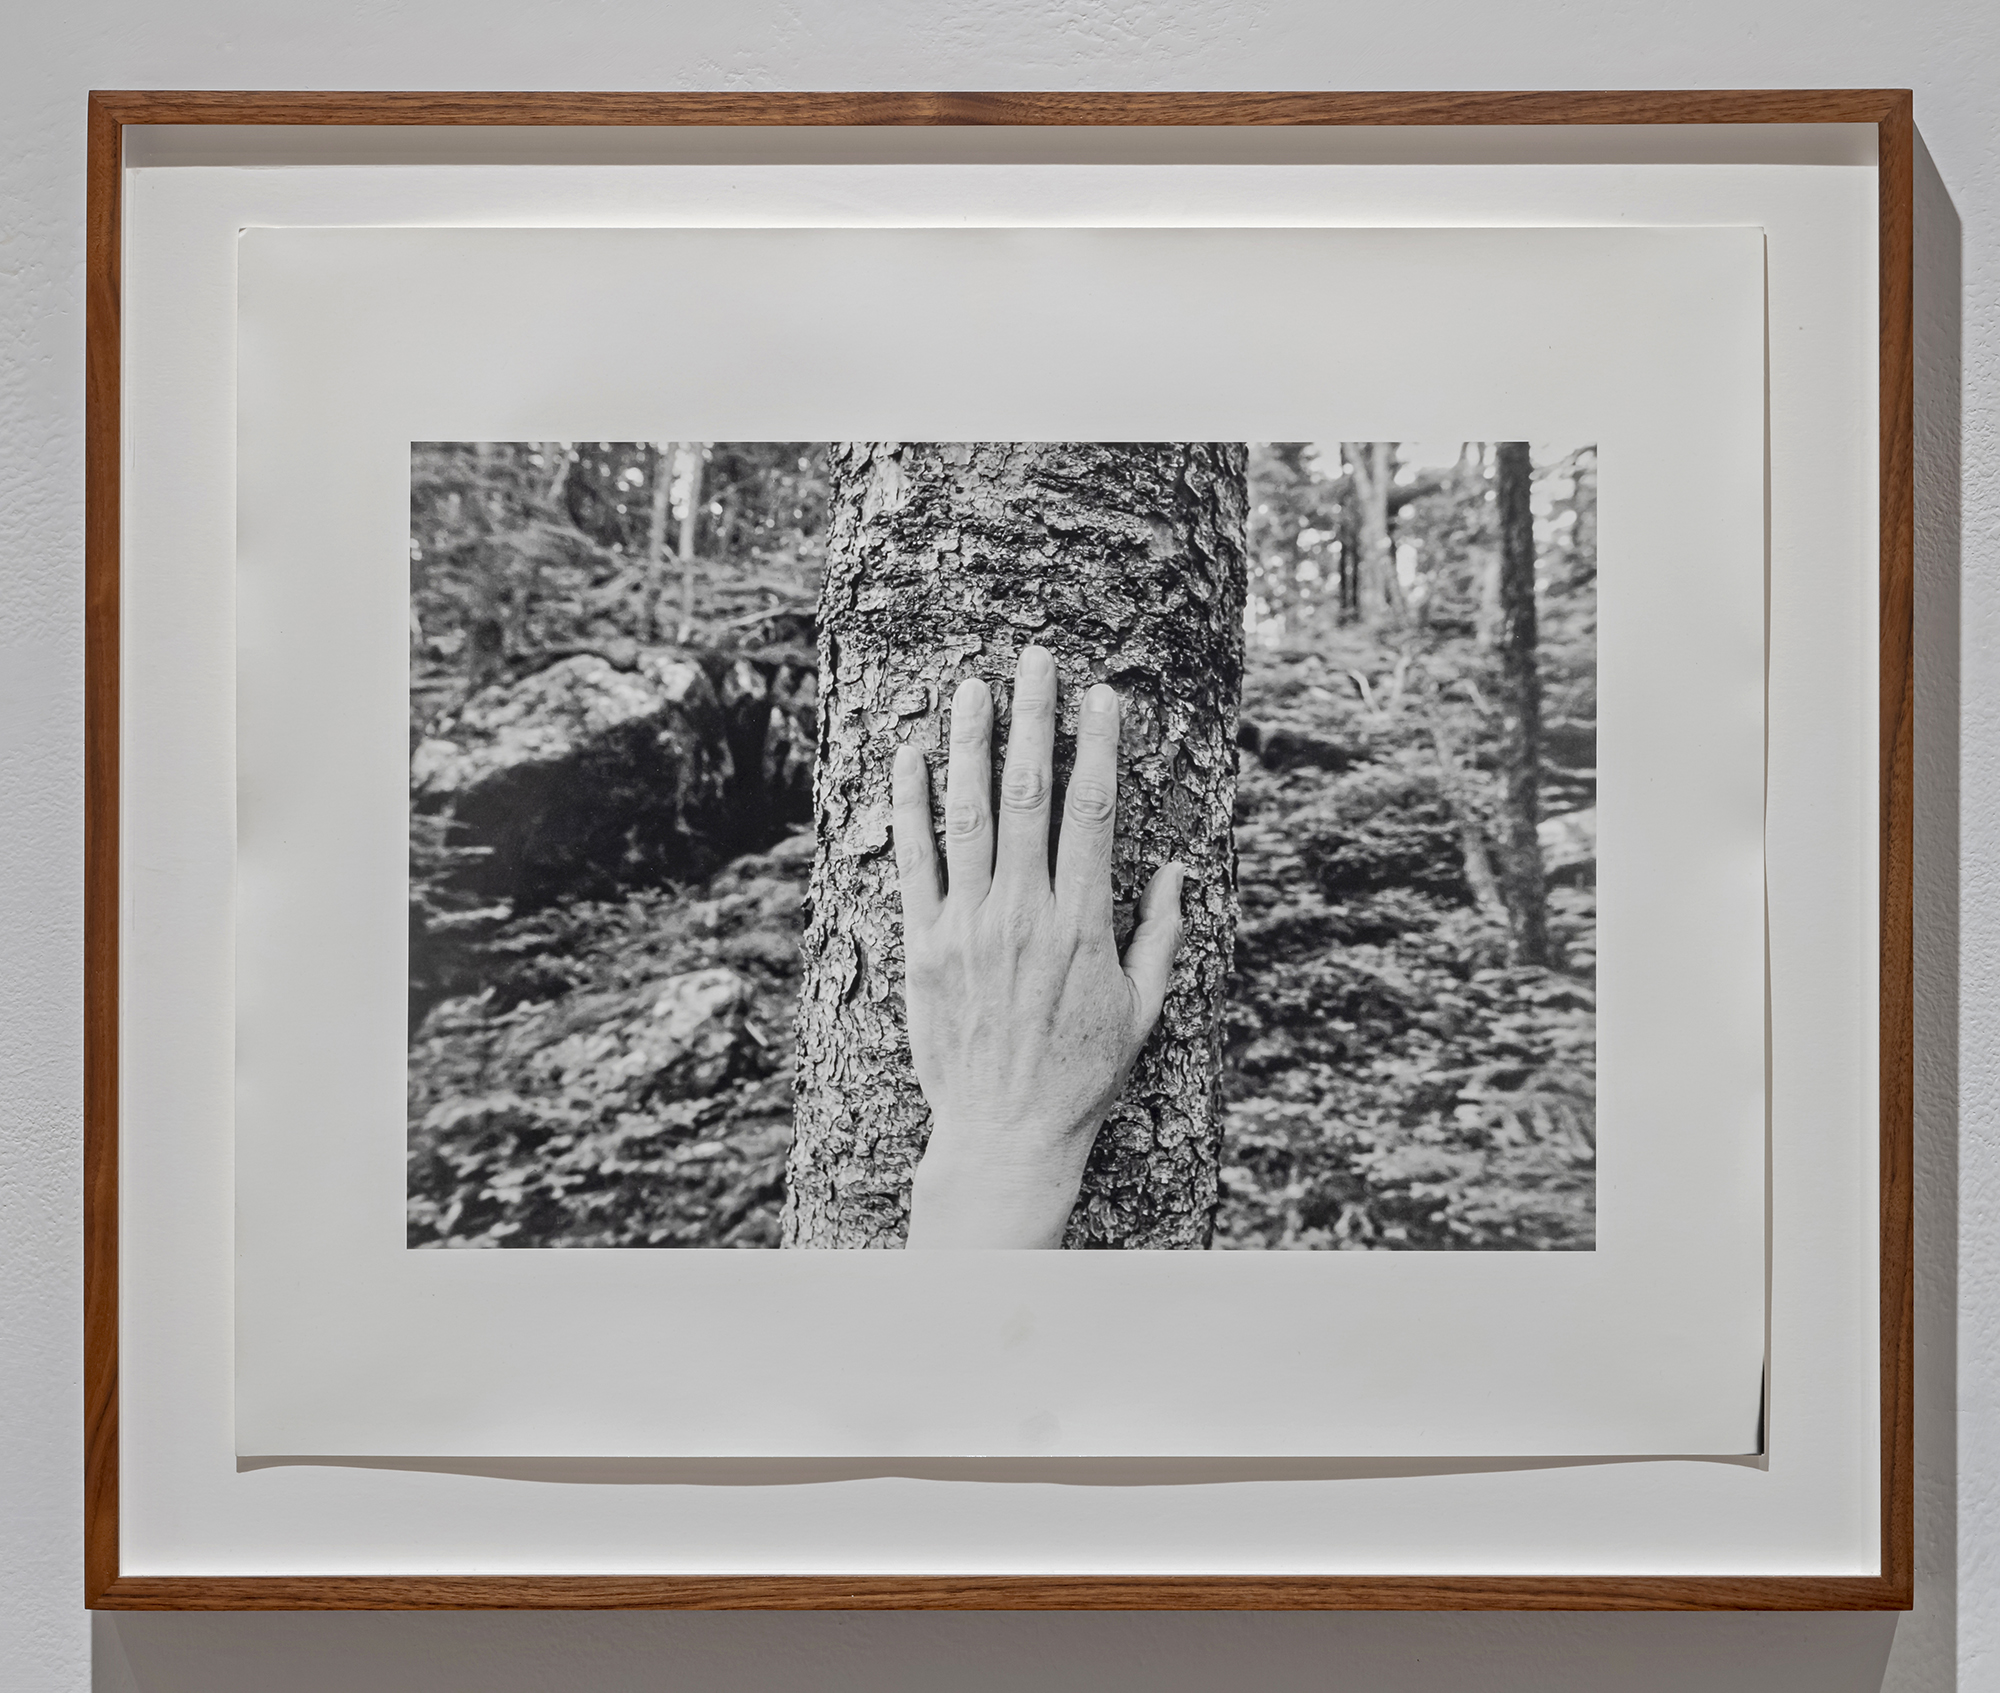 excerpt from the series Larch, Spruce, Fir, Birch, Hand, Blast Hole Pond Road, Newfoundland 2007 - ongoing